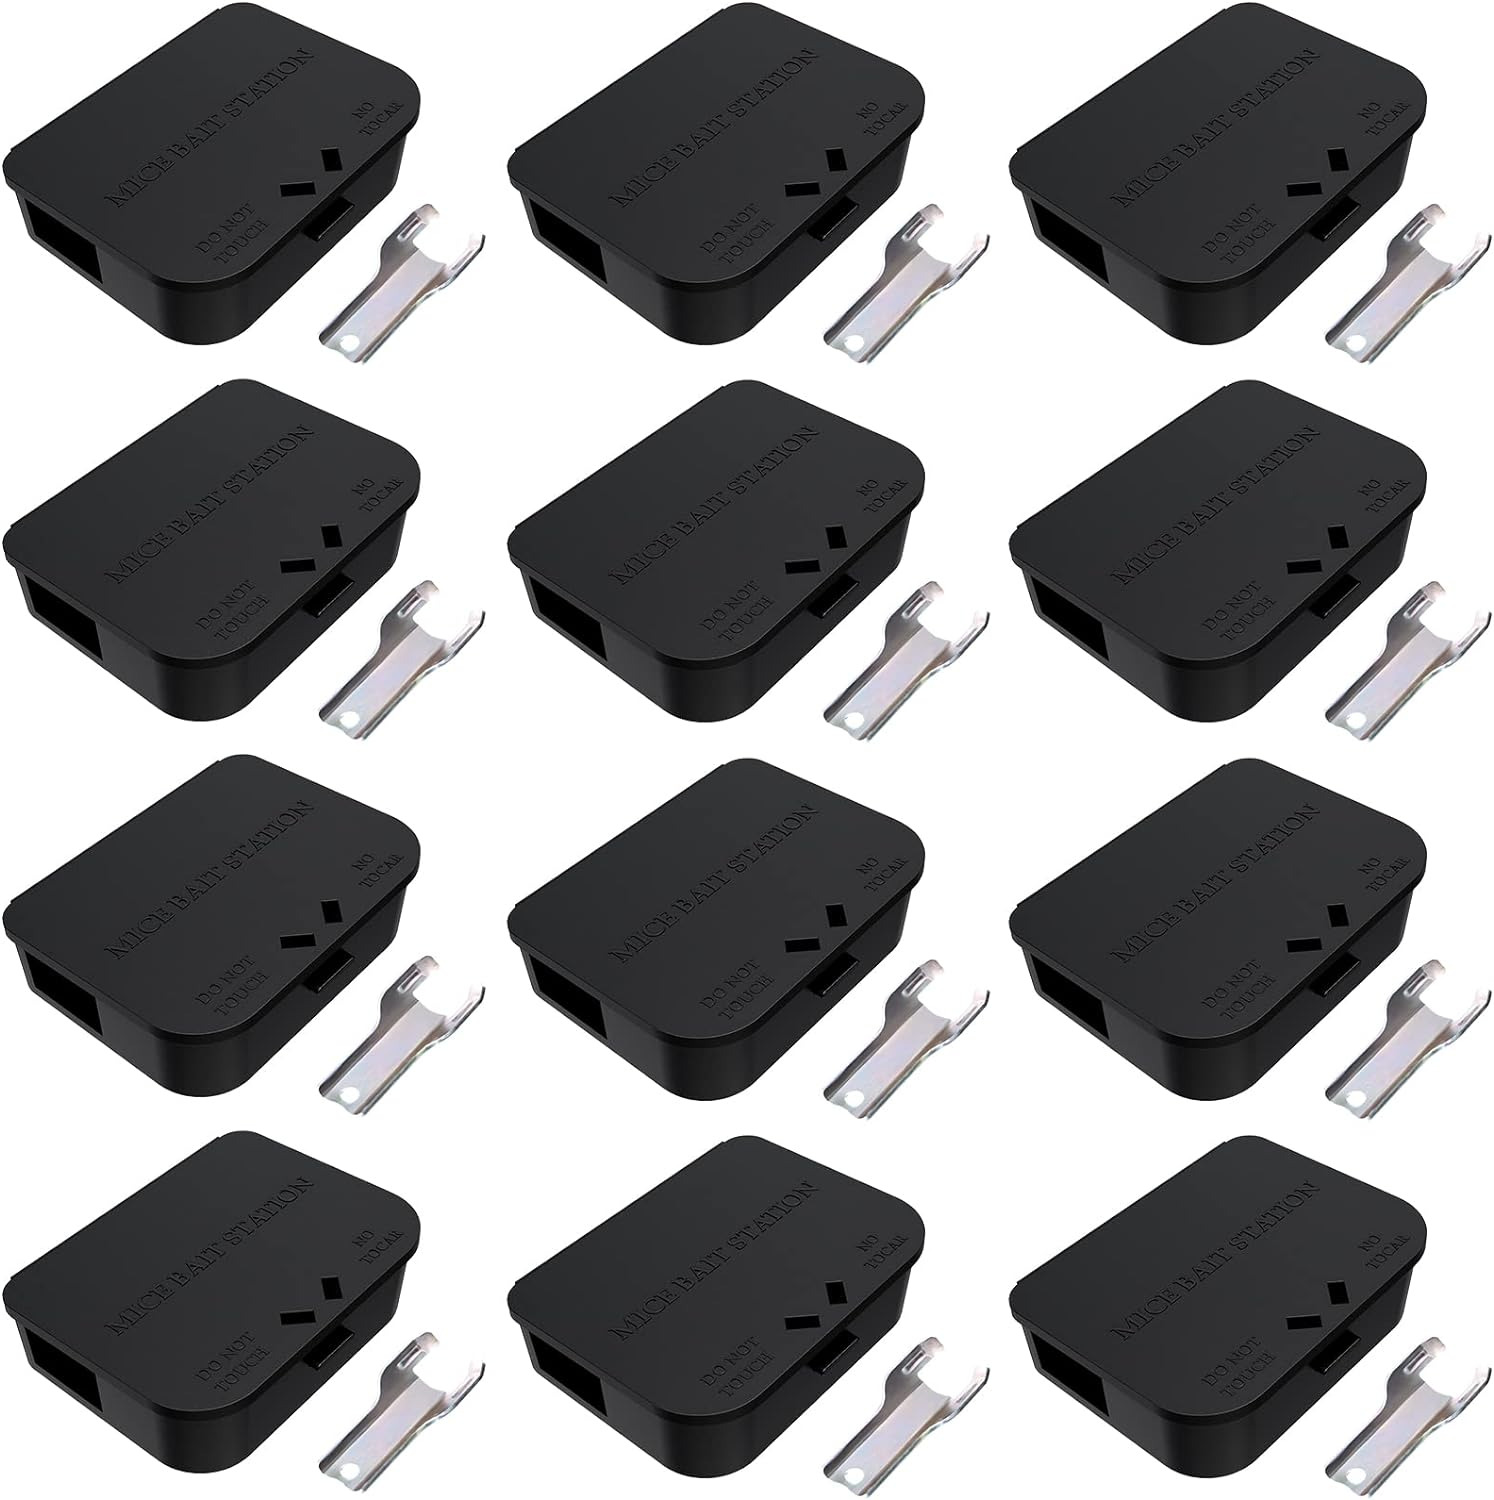 Mouse Stations with Keys 12 Pack, Keyless Design and Key Required Mouse Stations